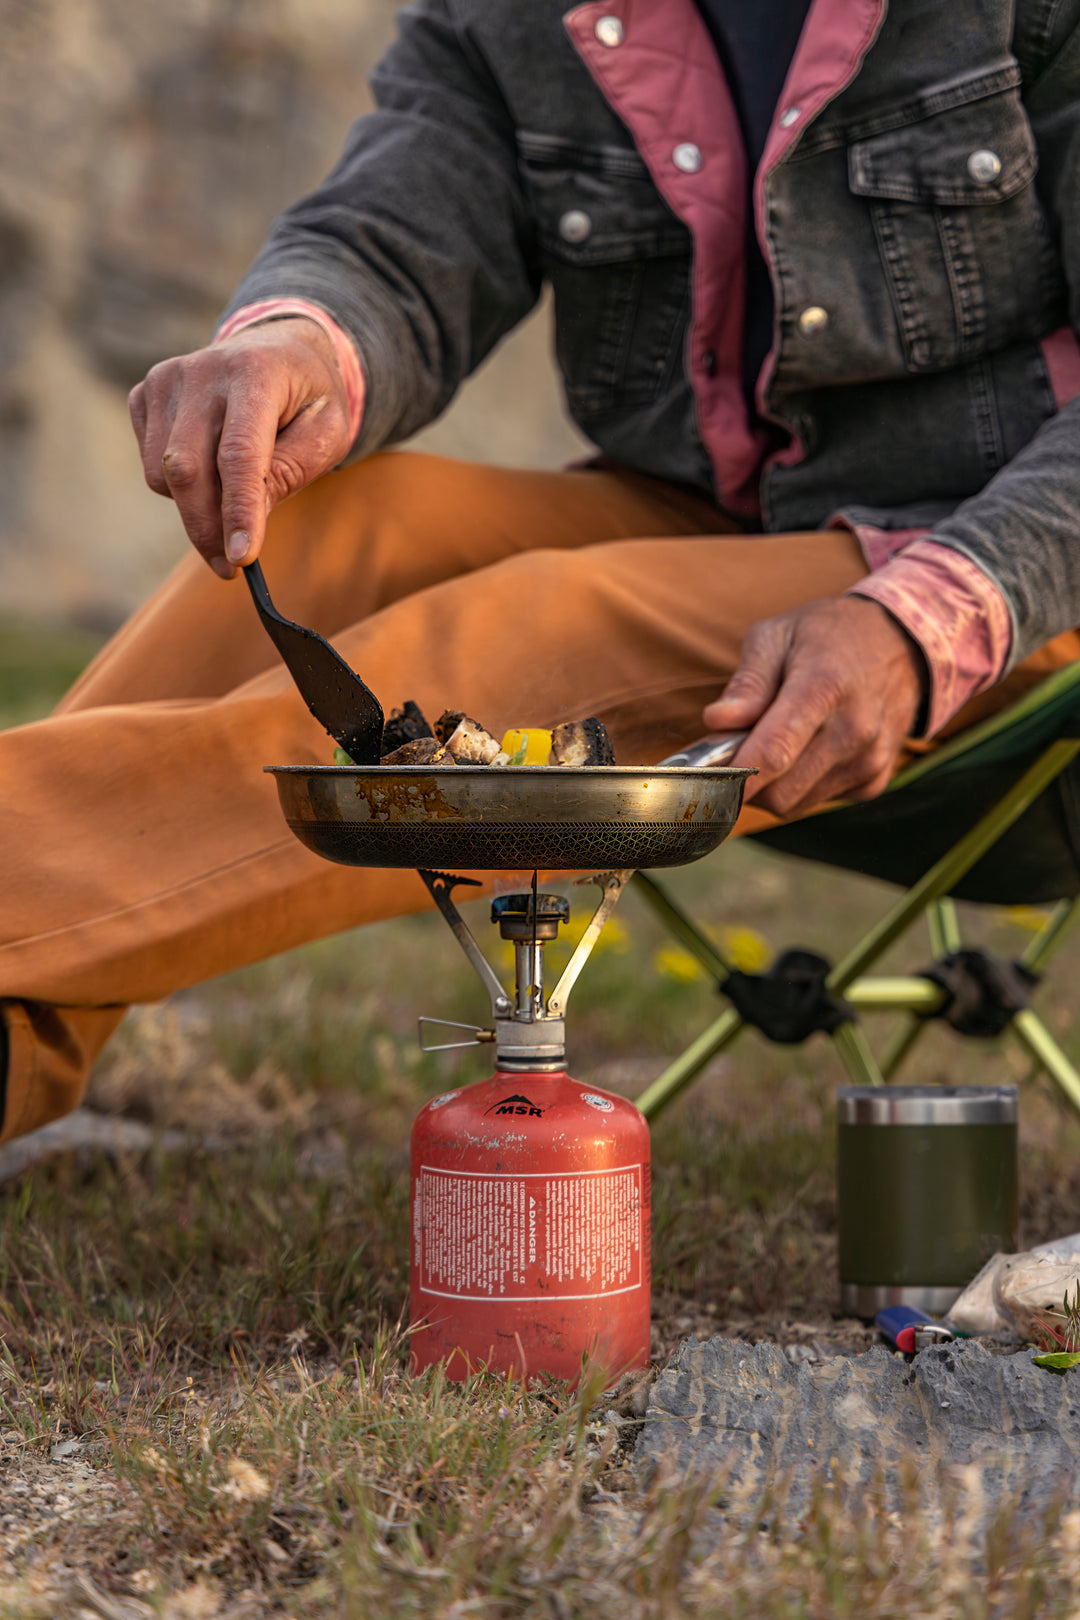 In his rugged Bulletprufe Jeans - Whiskey Denim Slim Fit, this man cooks up a storm with his favorite campfire cuisine, blending style and adventure seamlessly.